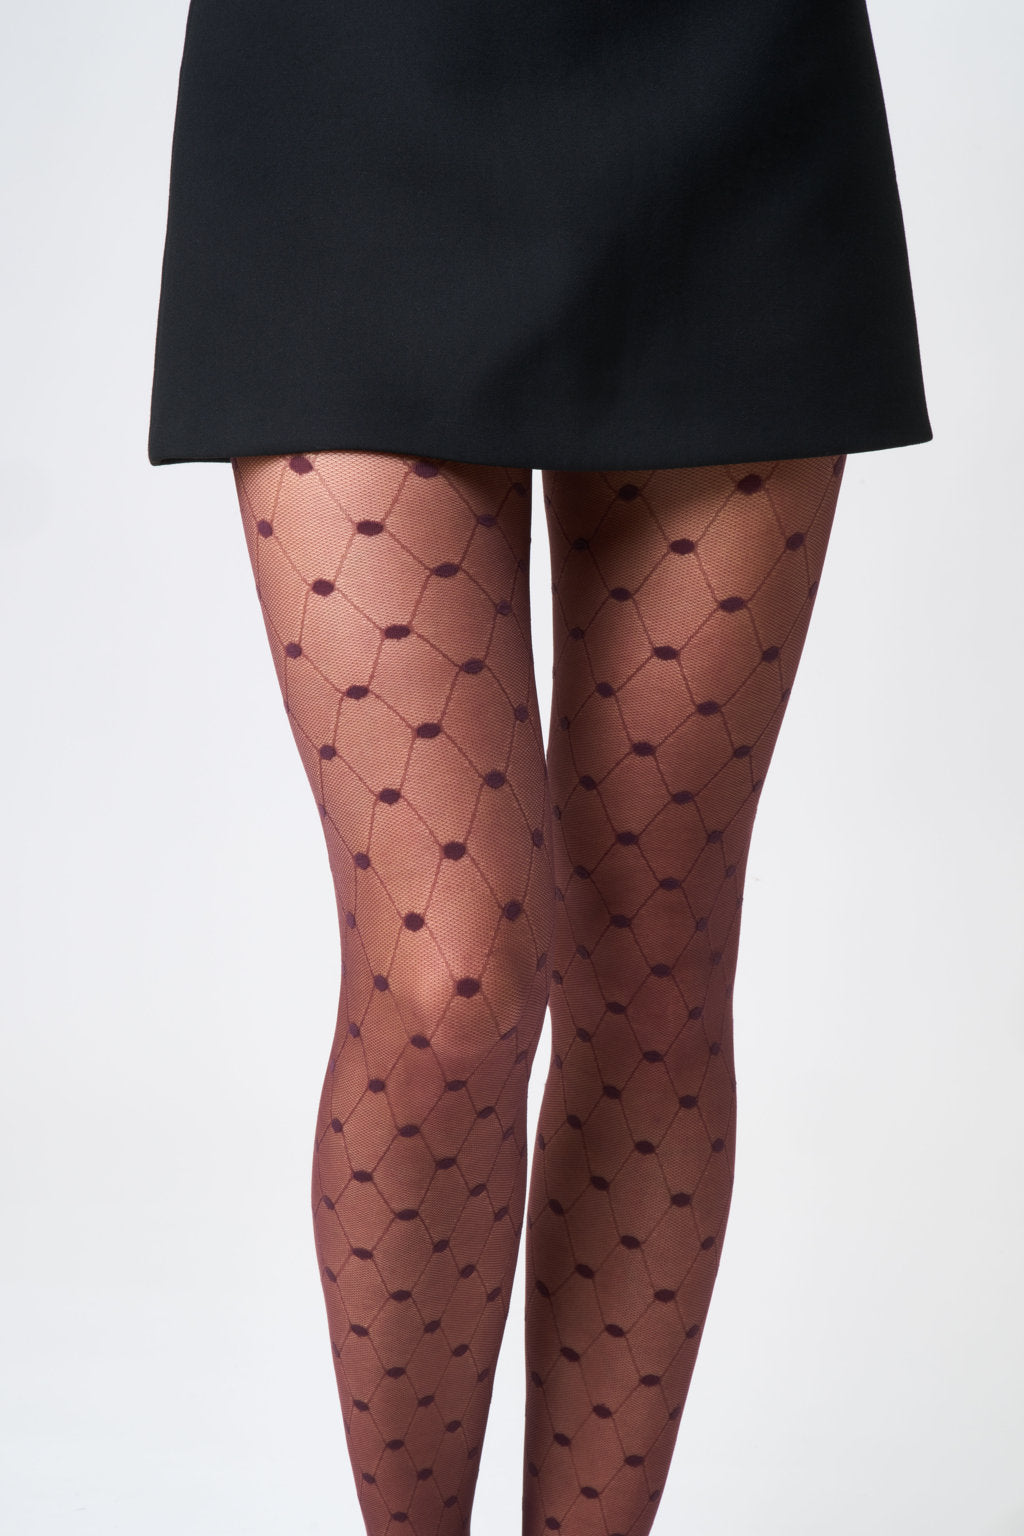 SiSi Spider Collant - Sheer burgundy fashion tights with an all over enclosed fishnet and spot style pattern